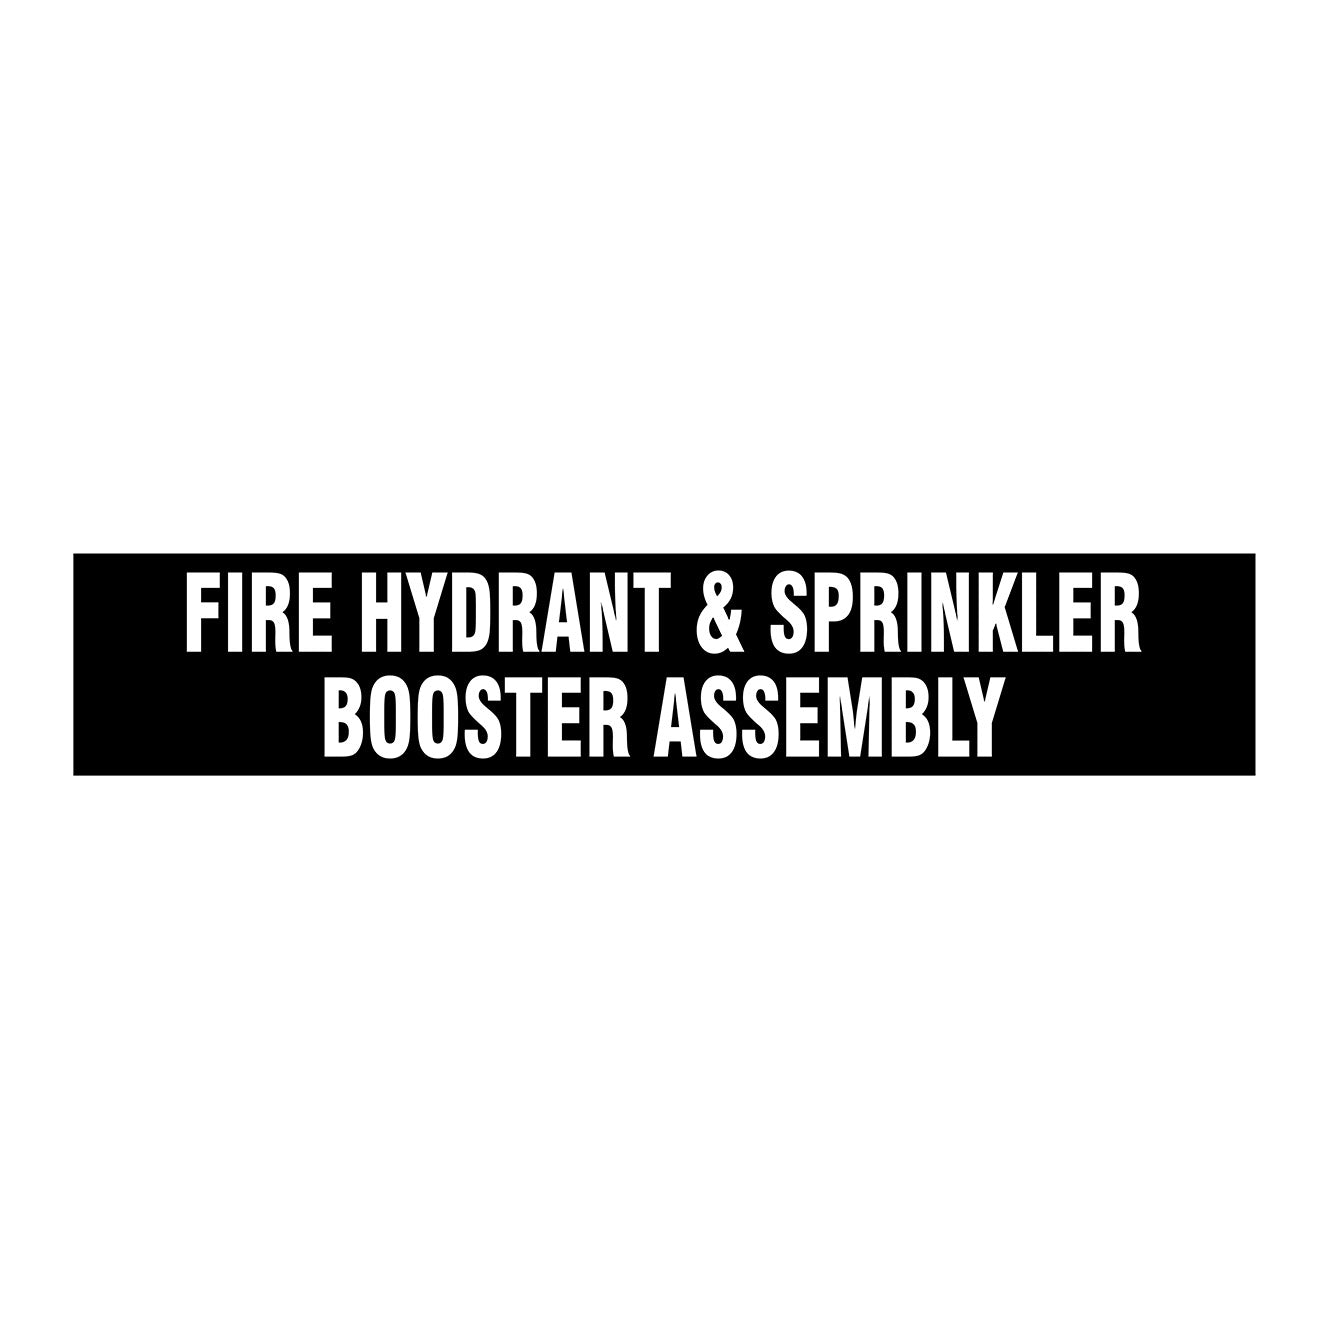 FIRE HYDRANT & SPRINKLER BOOSTER ASSEMBLY SIGN